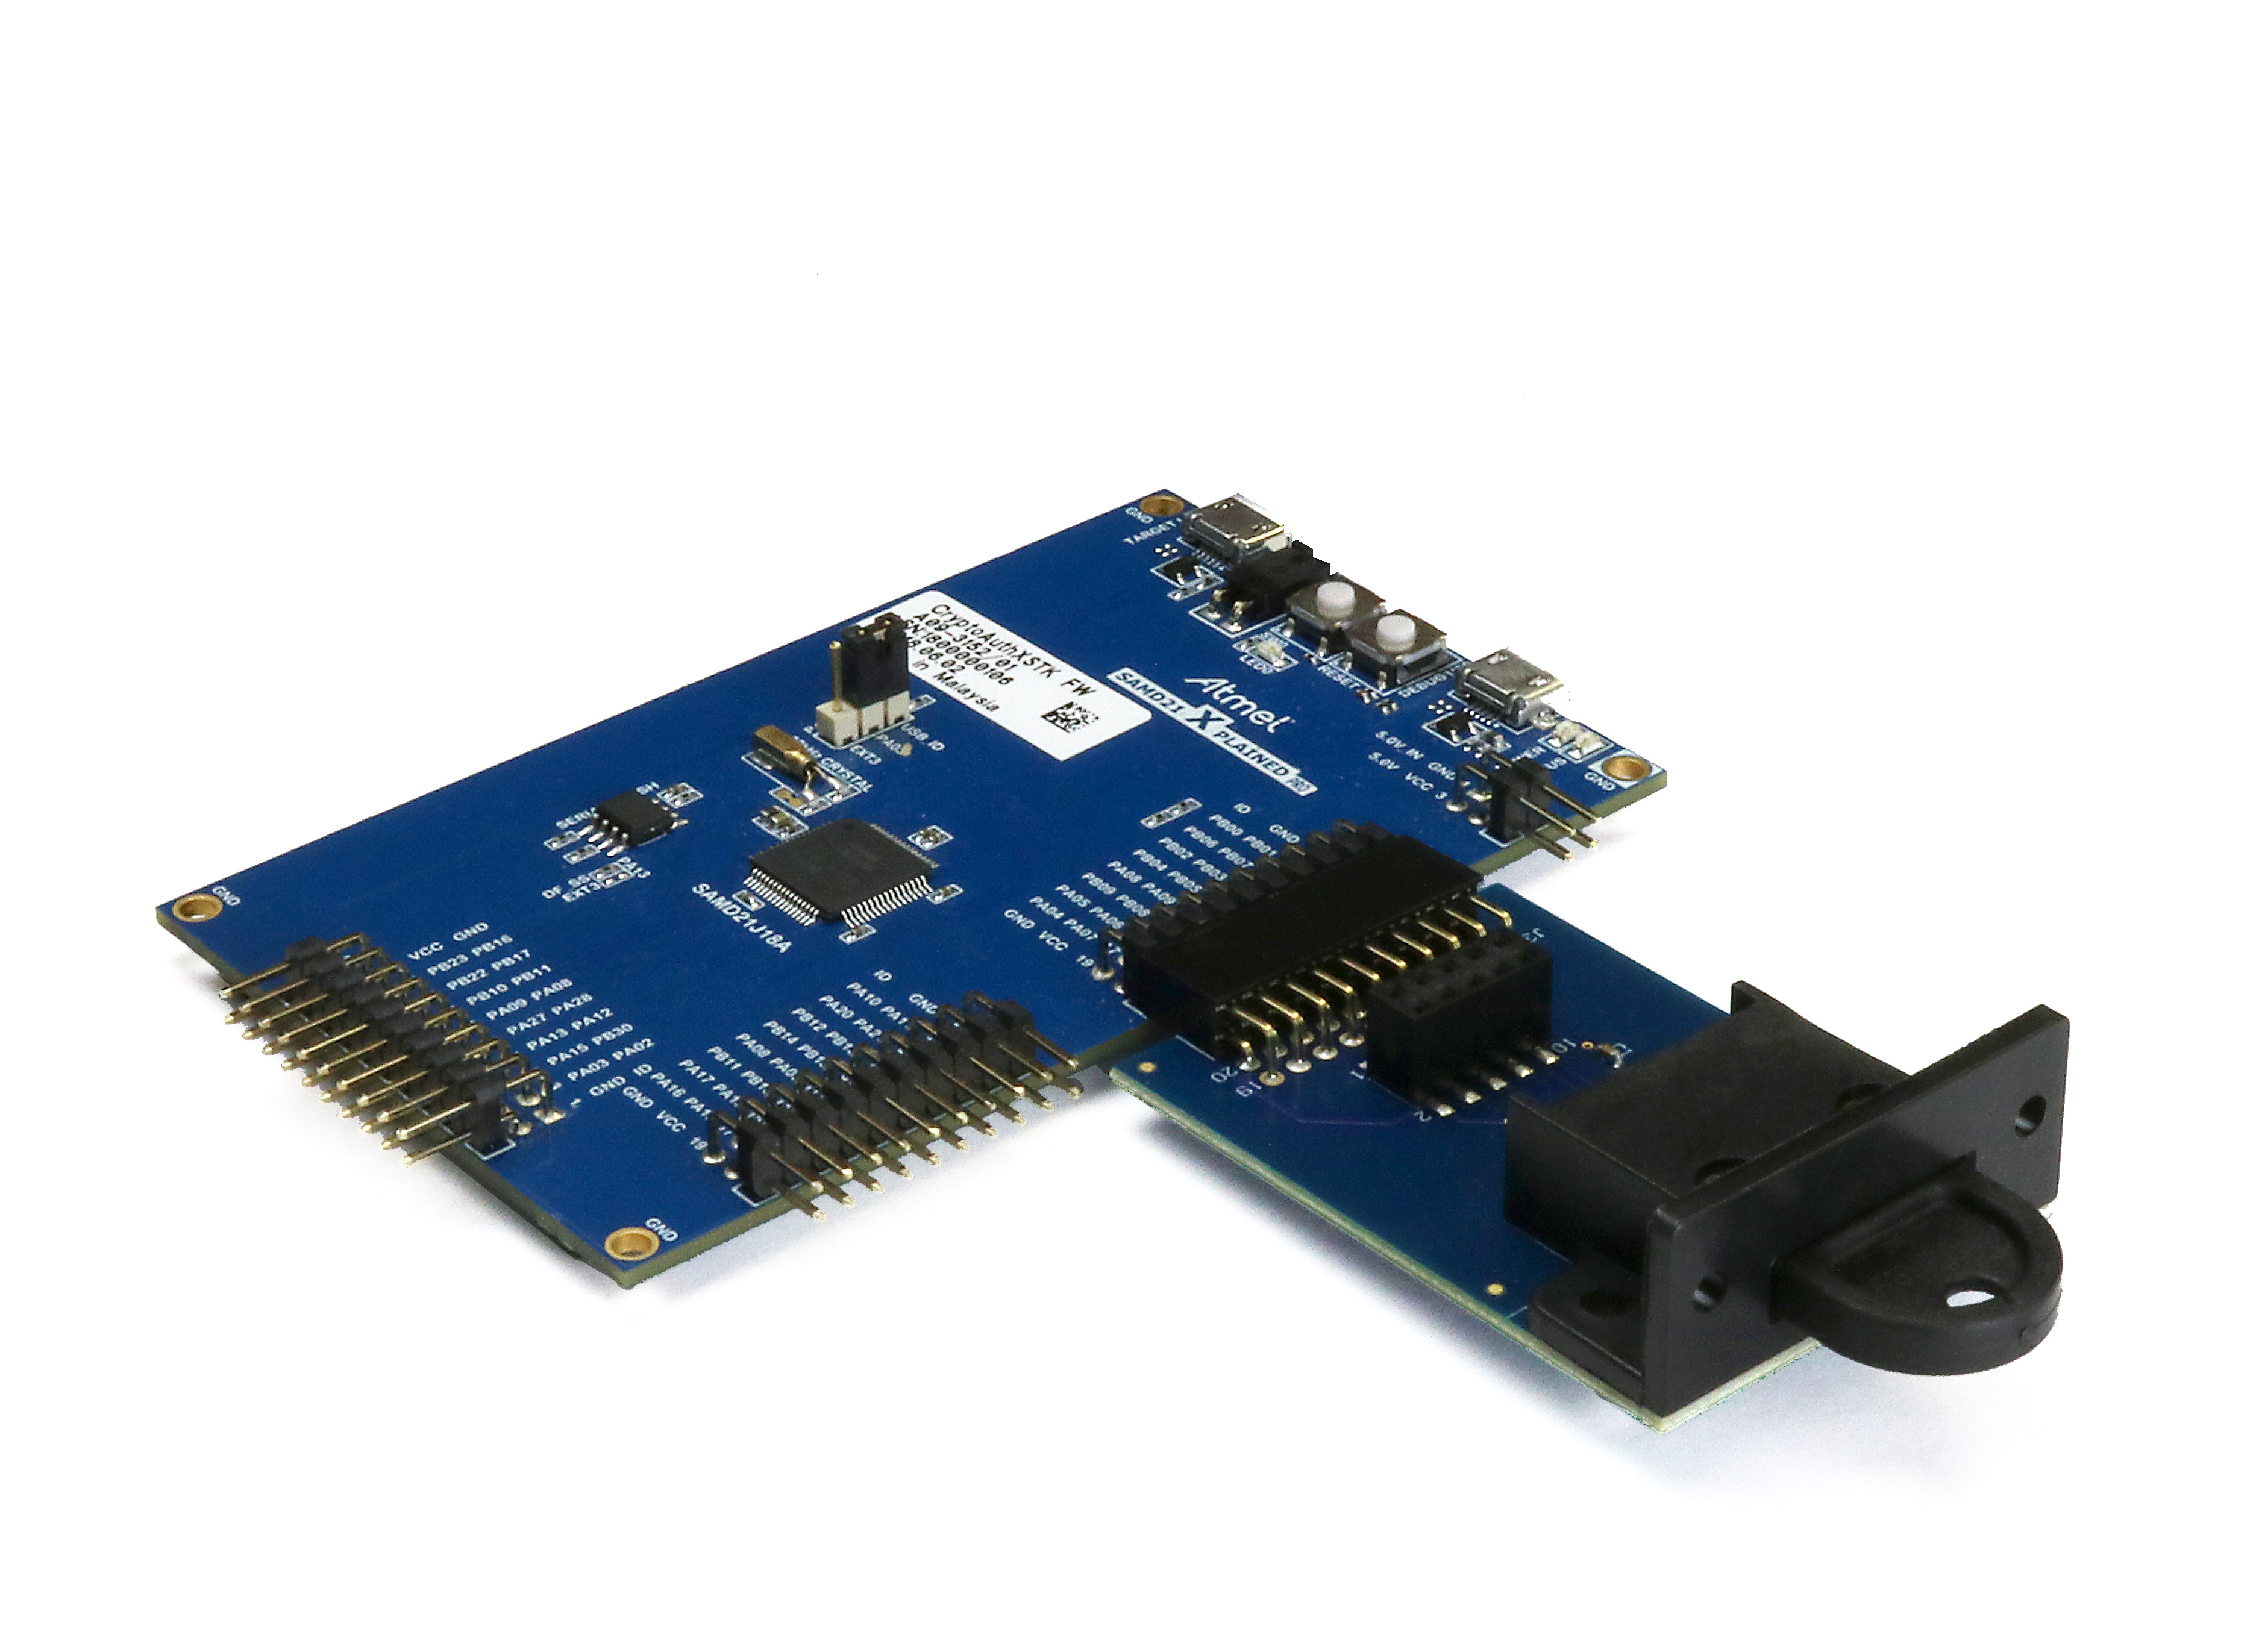 Datakey CryptoAuthentication™ memory tokens may be used with Microchip’s ATSAMD21-XPRO development board via a special Datakey extension board.